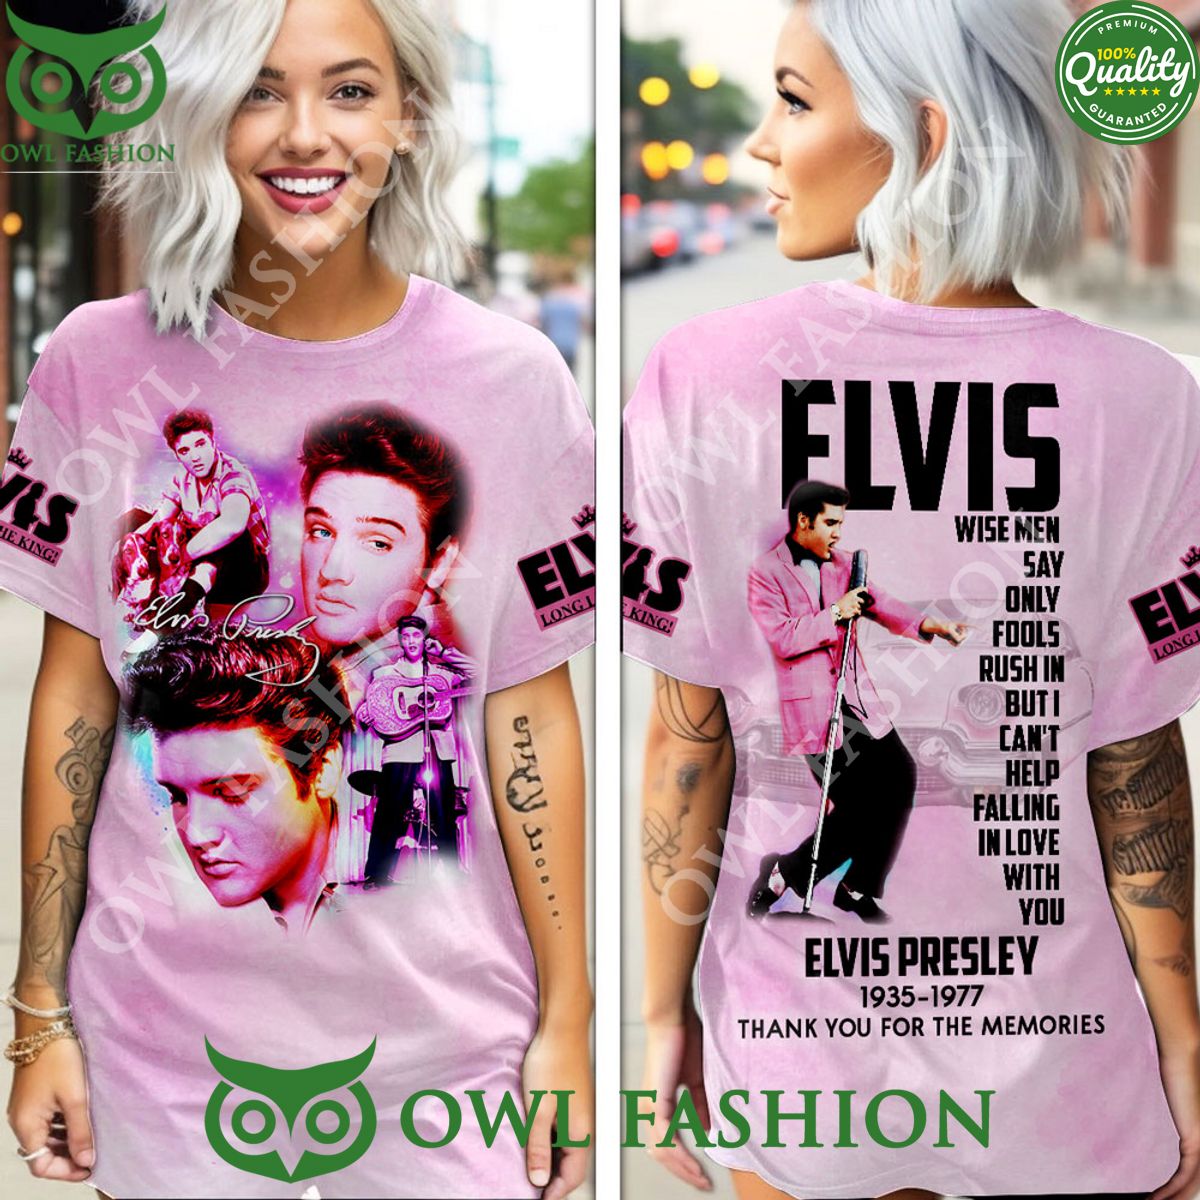 Elvis Presley American Singer 3D T Shirt Have you joined a gymnasium?